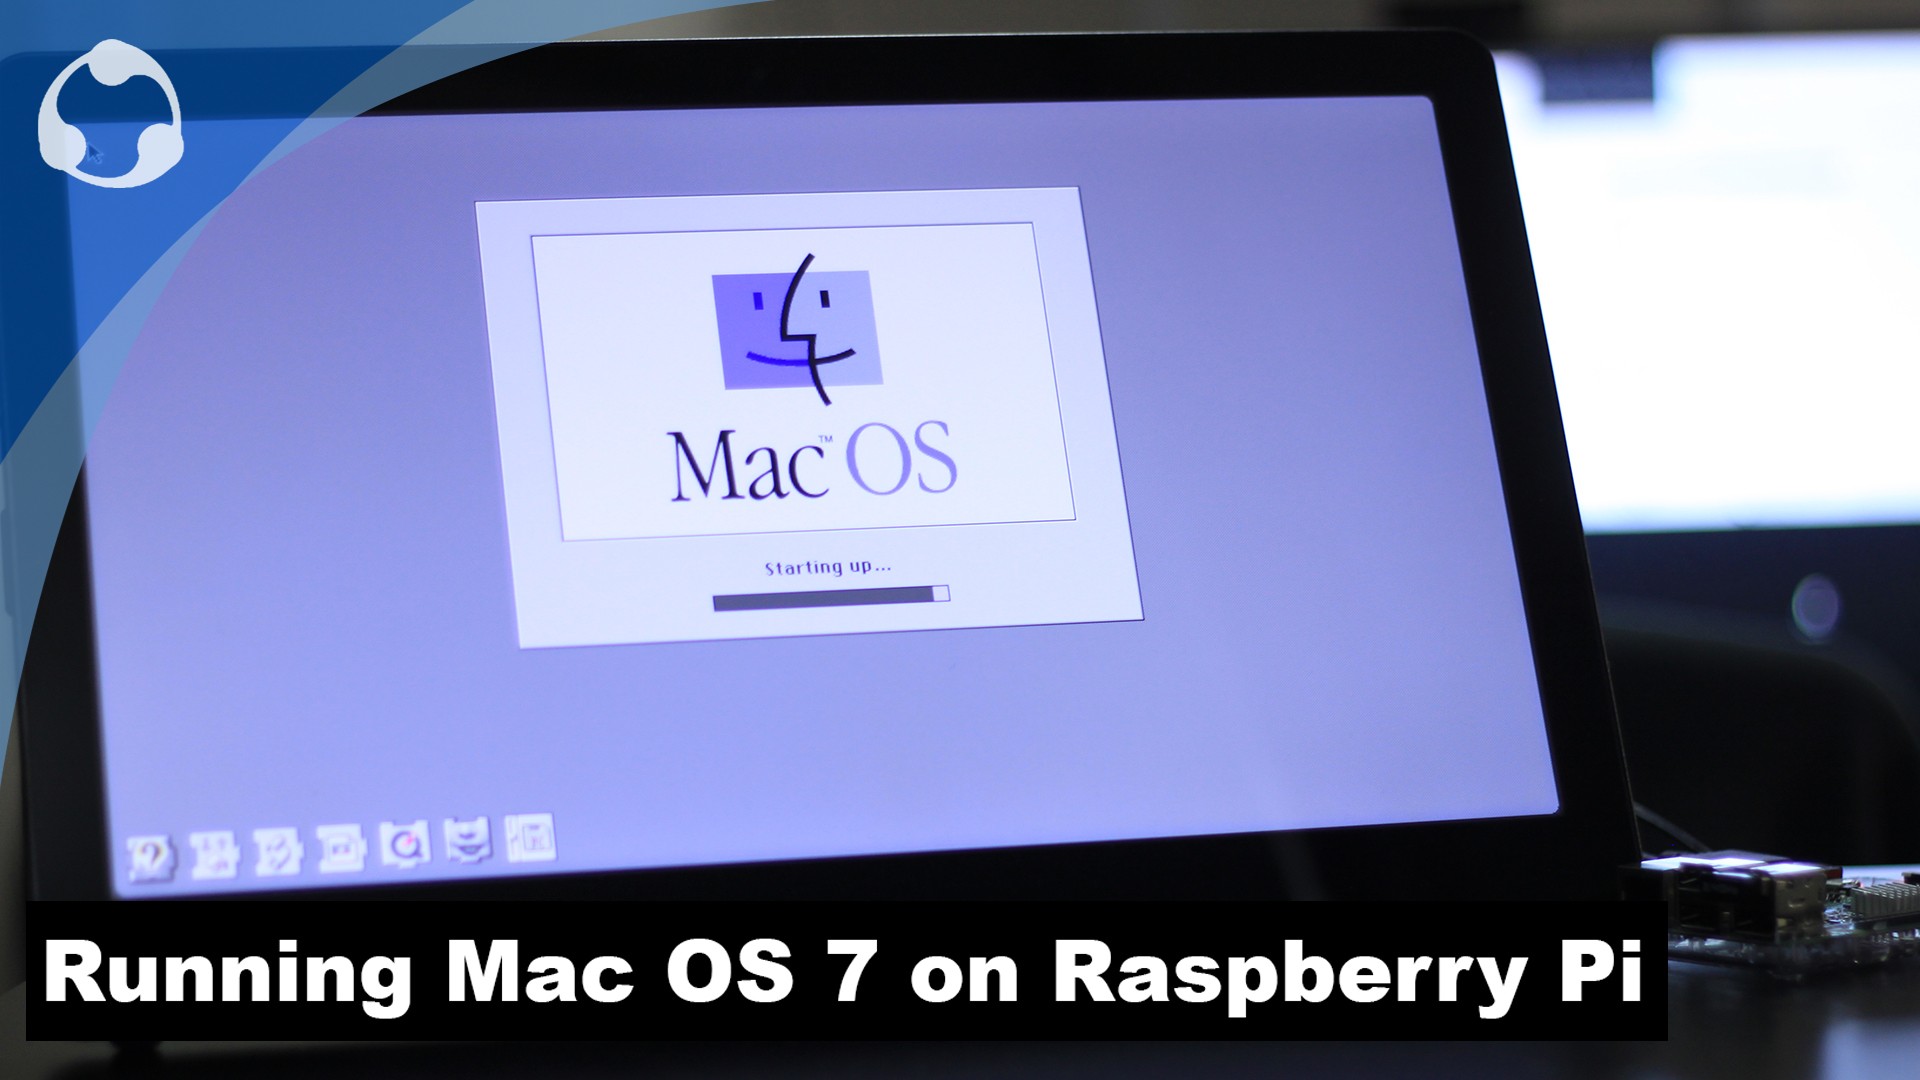 Running Mac OS 7 on Raspberry Pi with Color